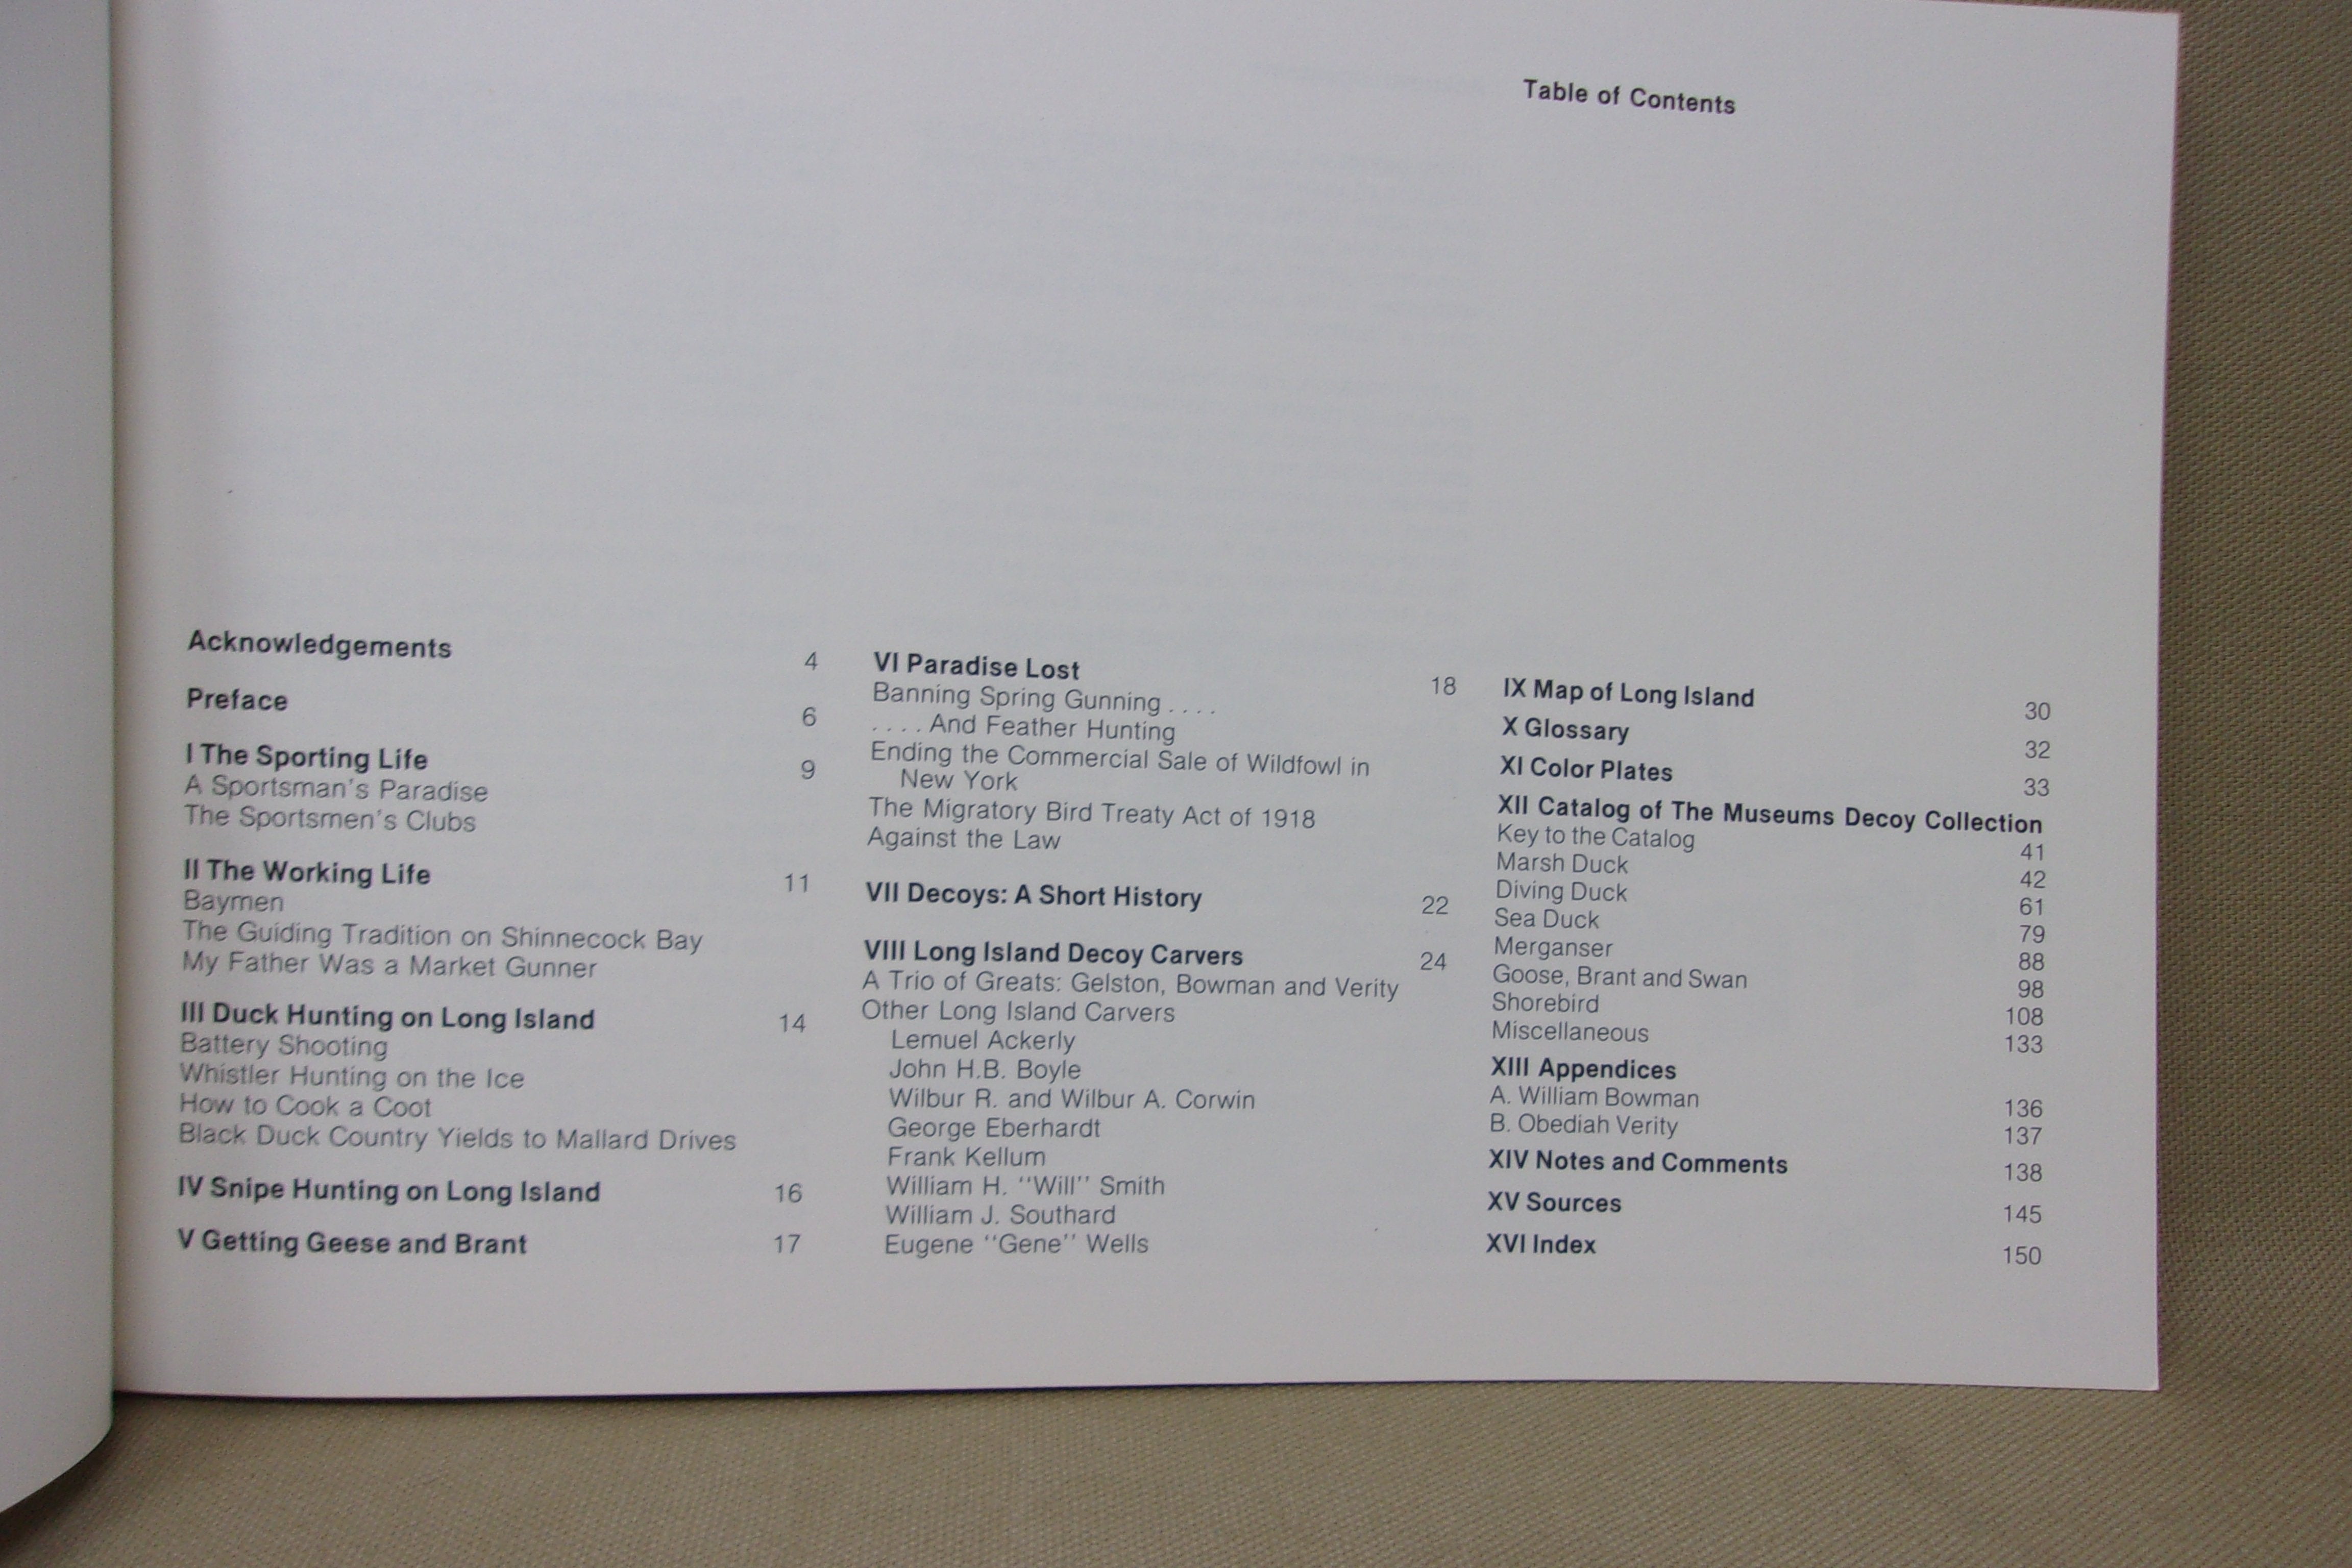 TABLE OF CONTENTS - LOT publications